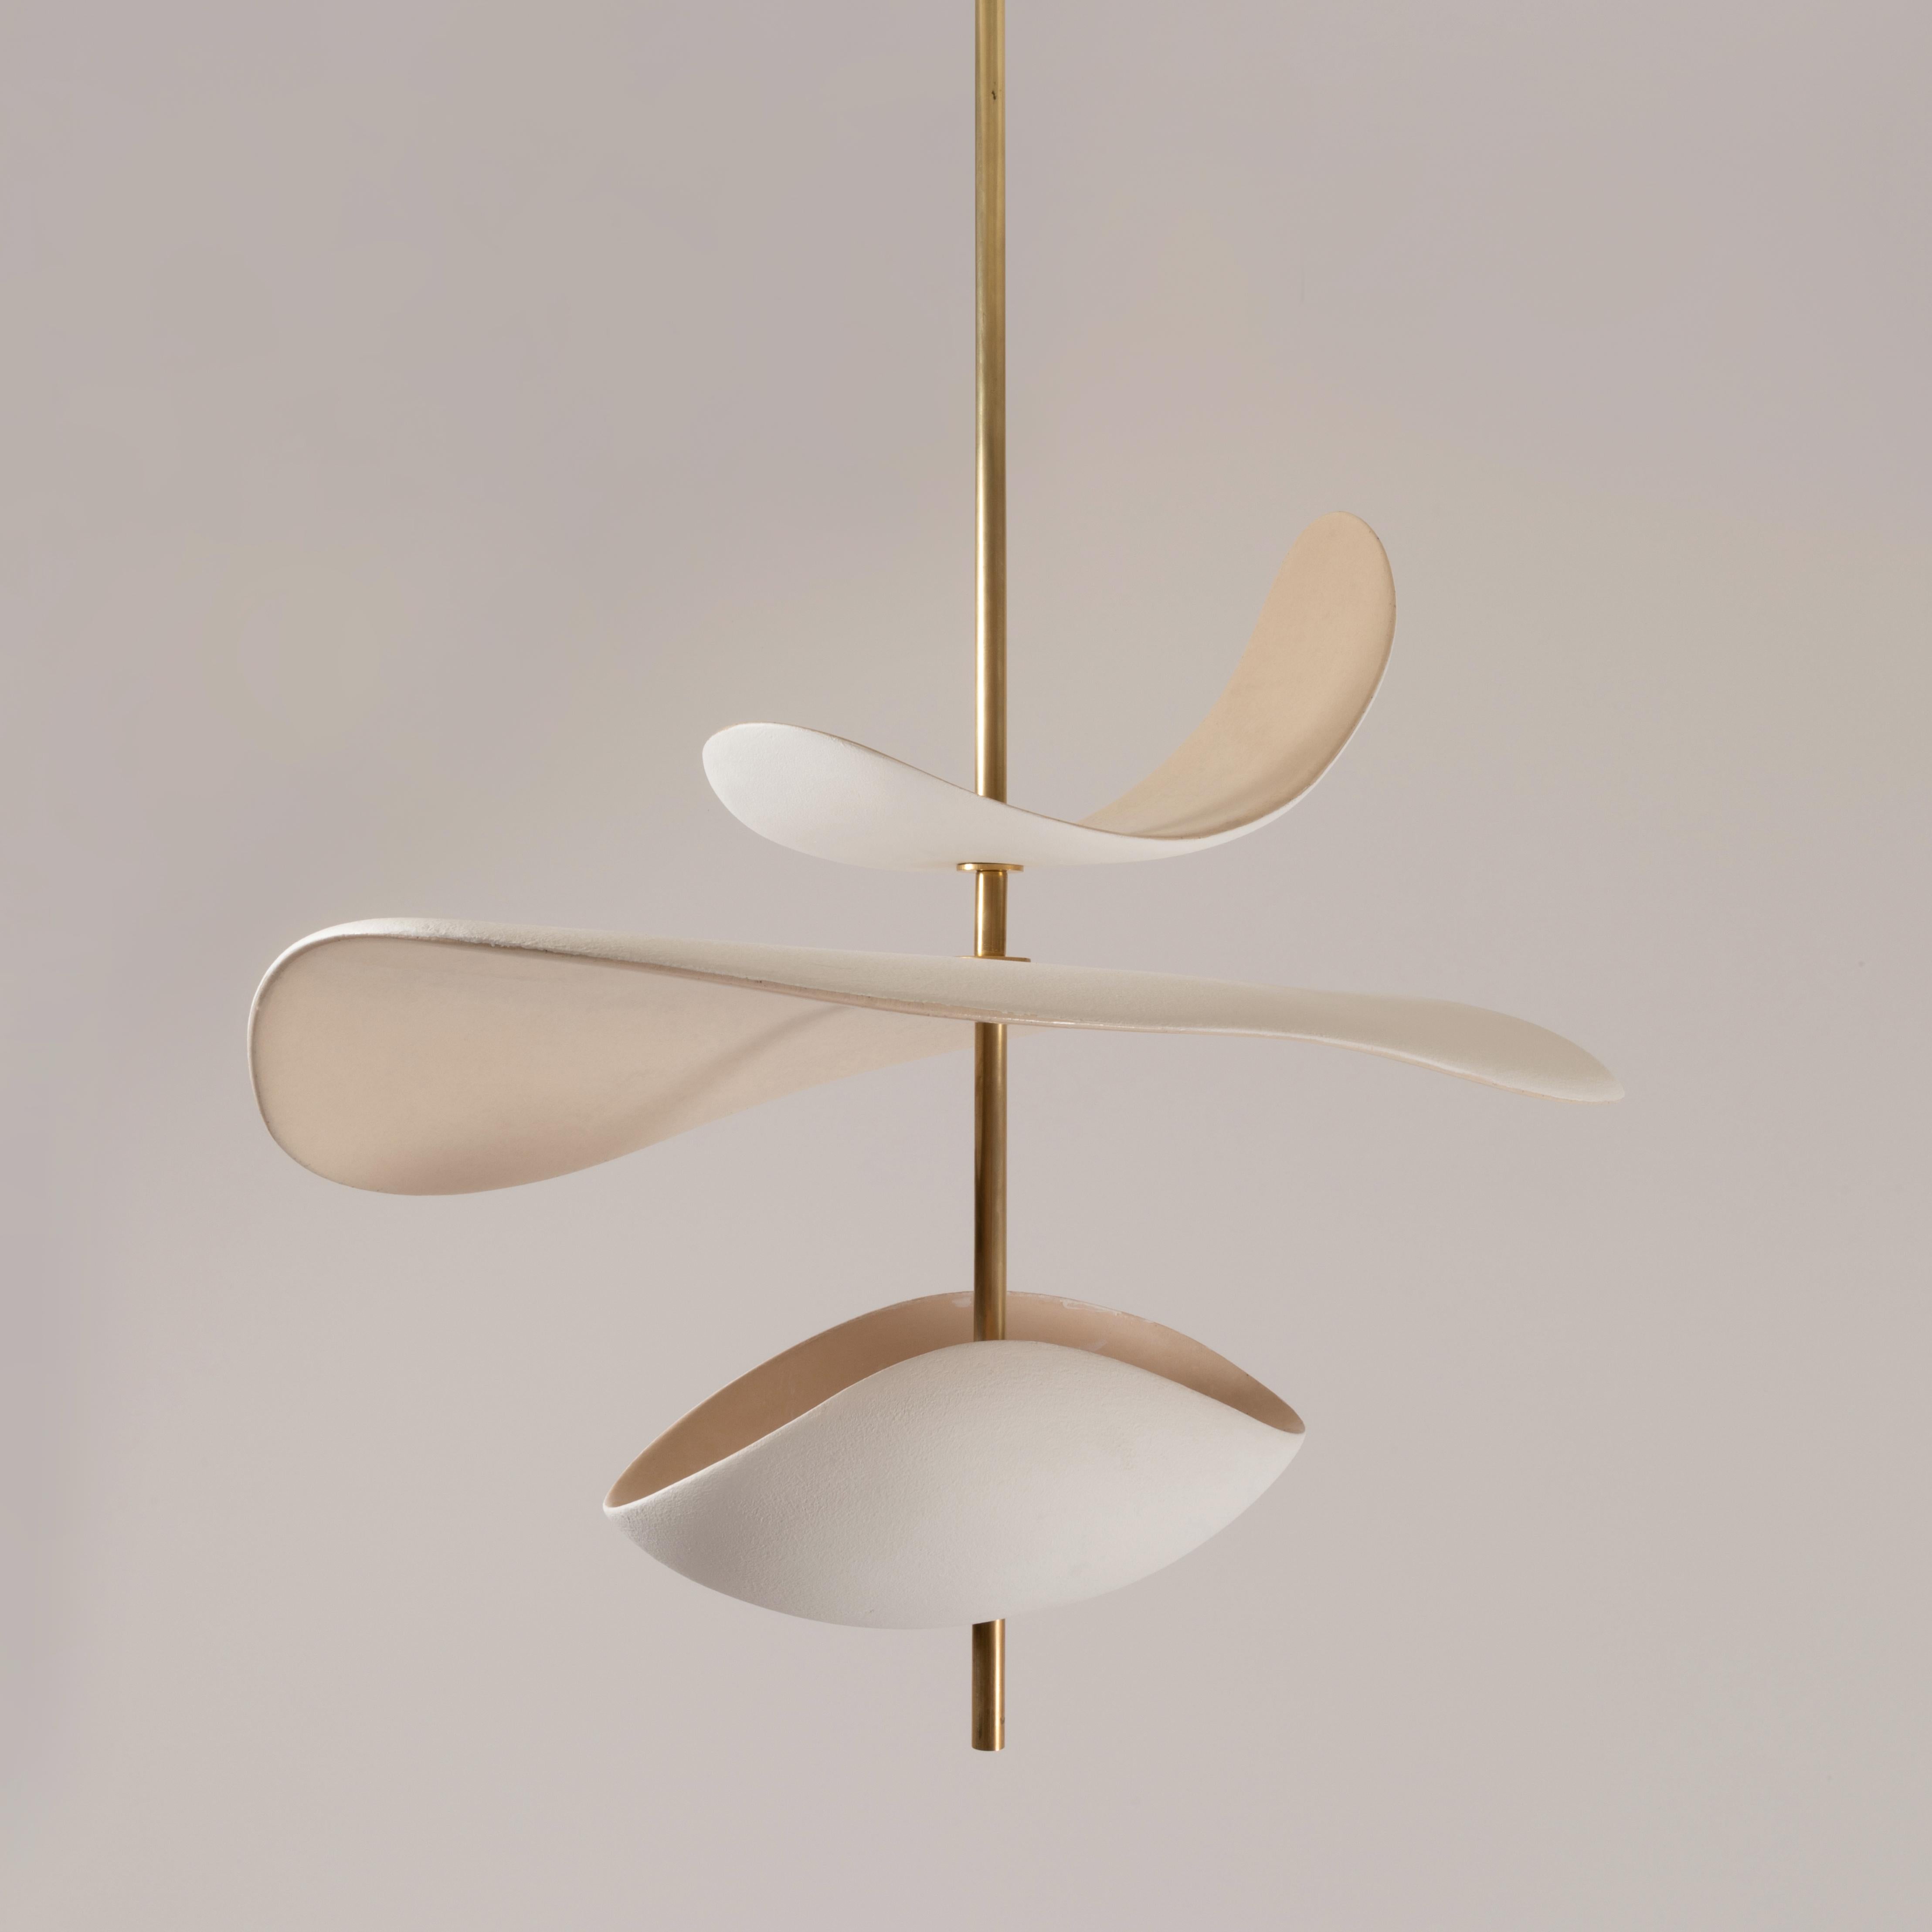 Free Form B pendant by Elsa Foulon
Dimensions: D 75 x H 65 cm 
Materials: Ceramic, Brass
Unique Piece
Also available in different options: Bowl or Cup (lower part).
The height is min 65 cm and customizable to the customer's size. 

All our